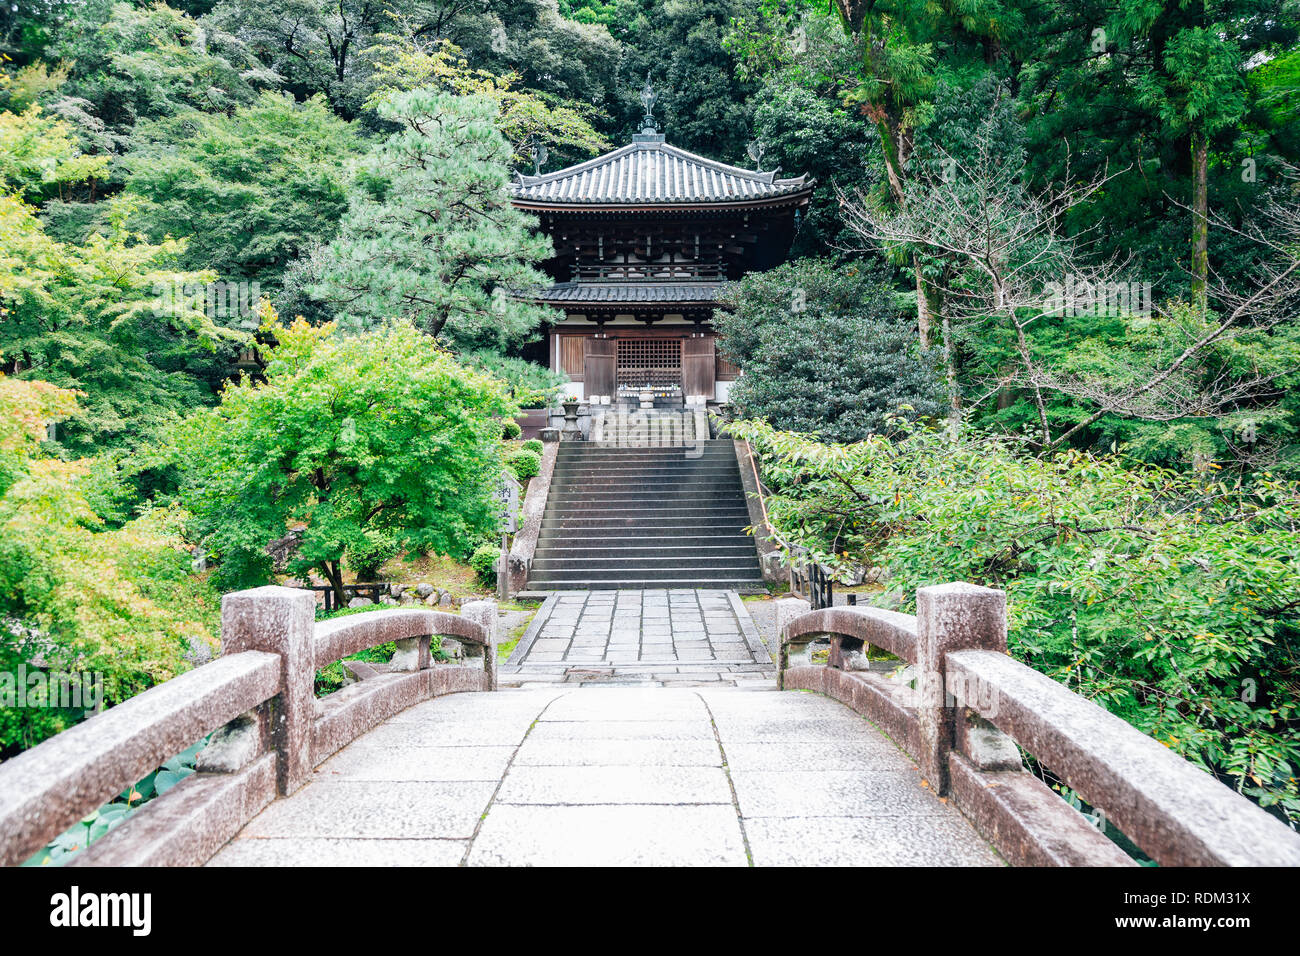 Chion-in temple and summer green garden in Kyoto, Japan Stock Photo